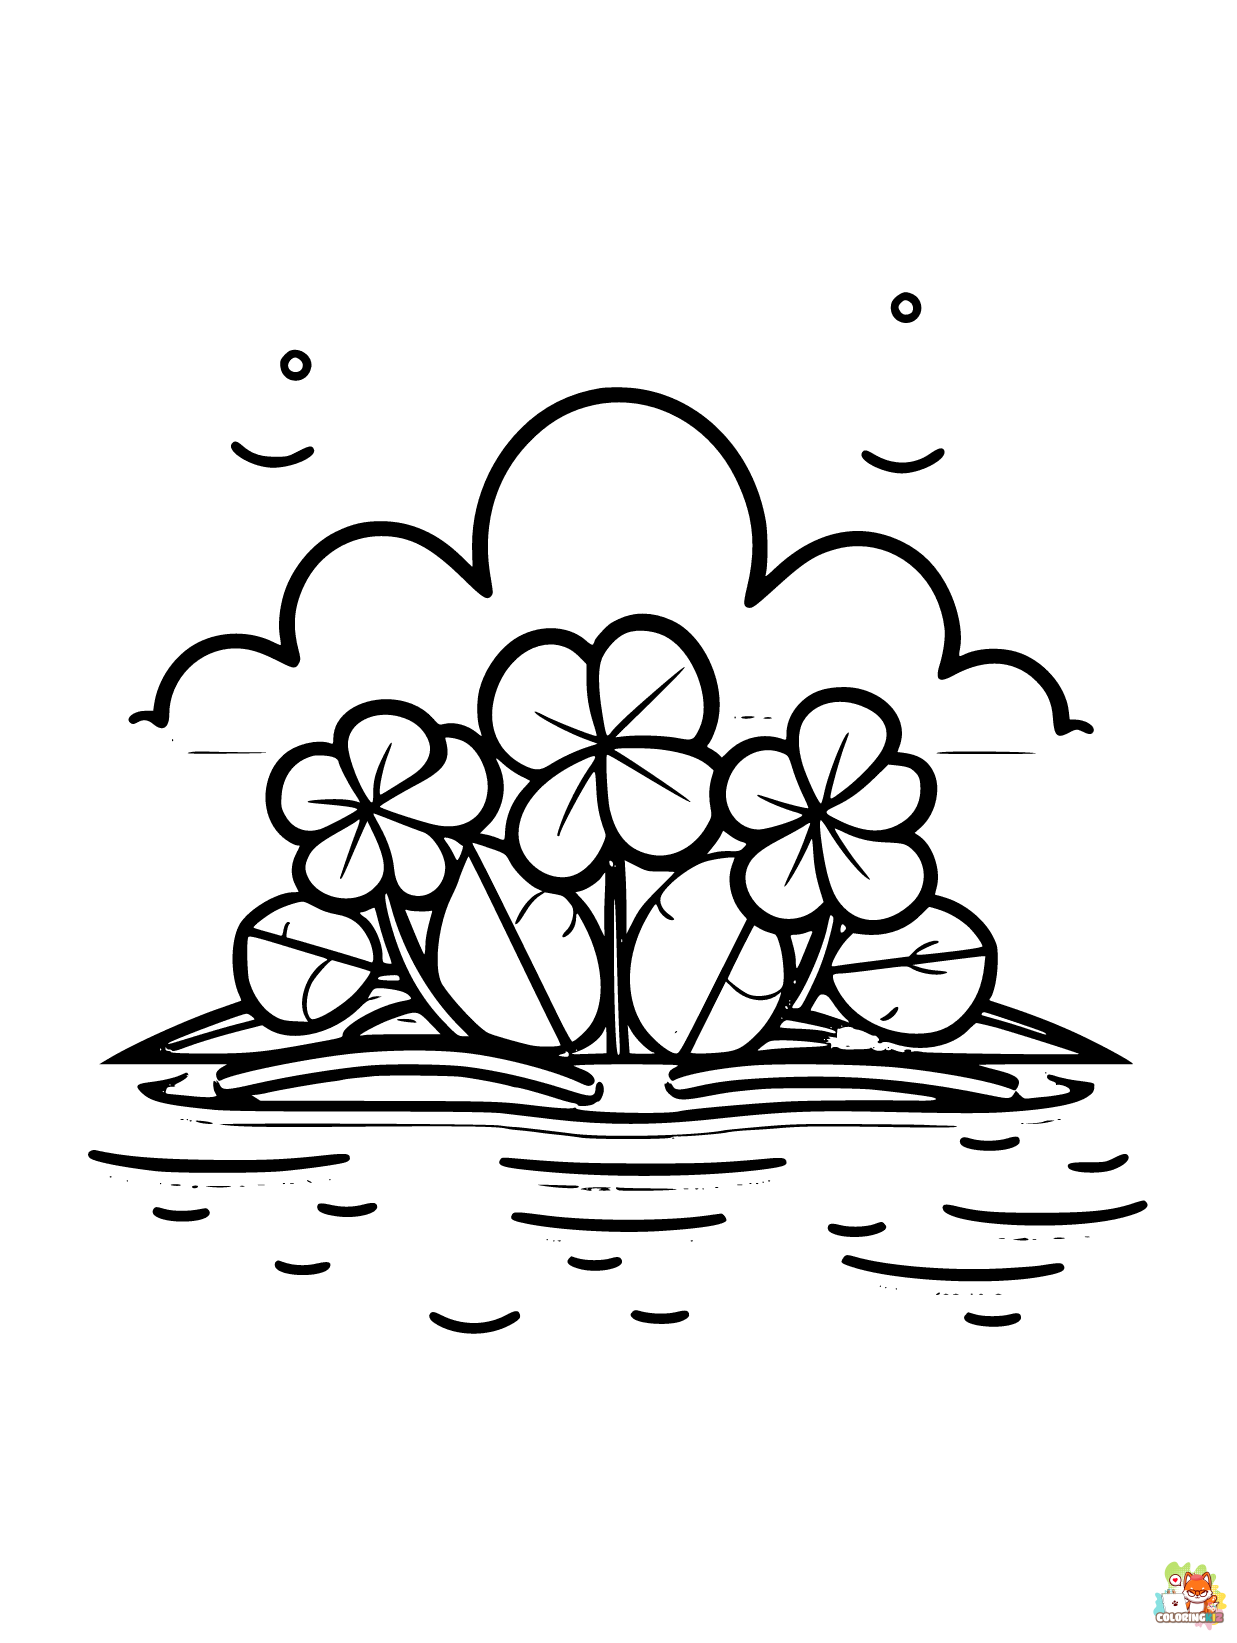 Free clover coloring pages for kids